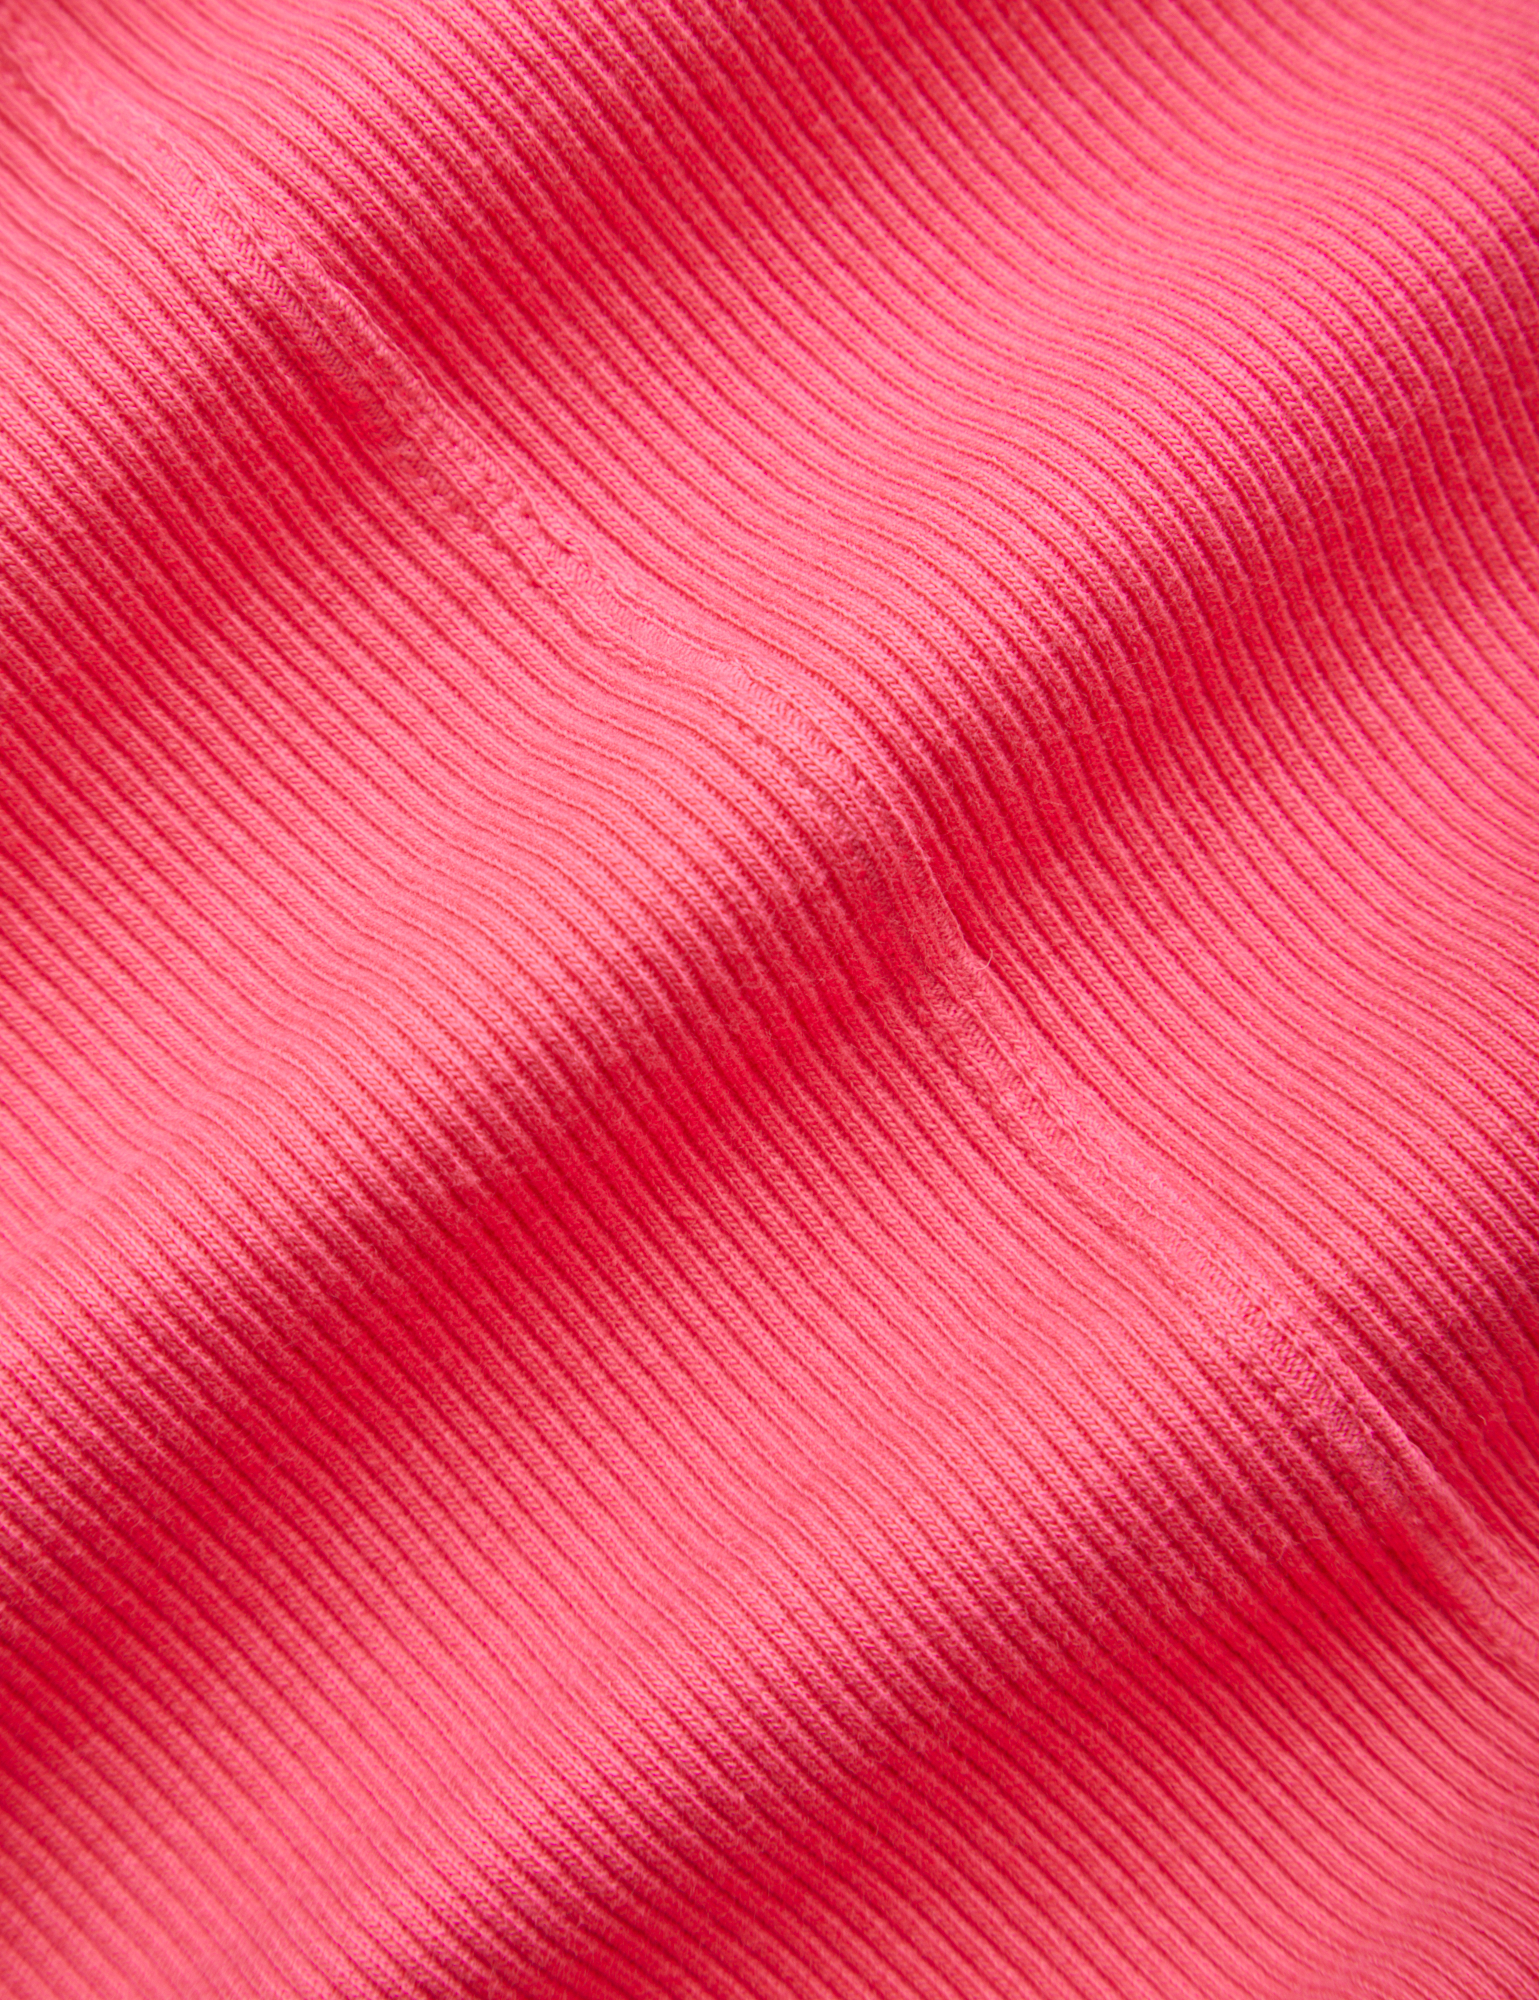 Wrap Top in Hot Pink detail close up of fabric